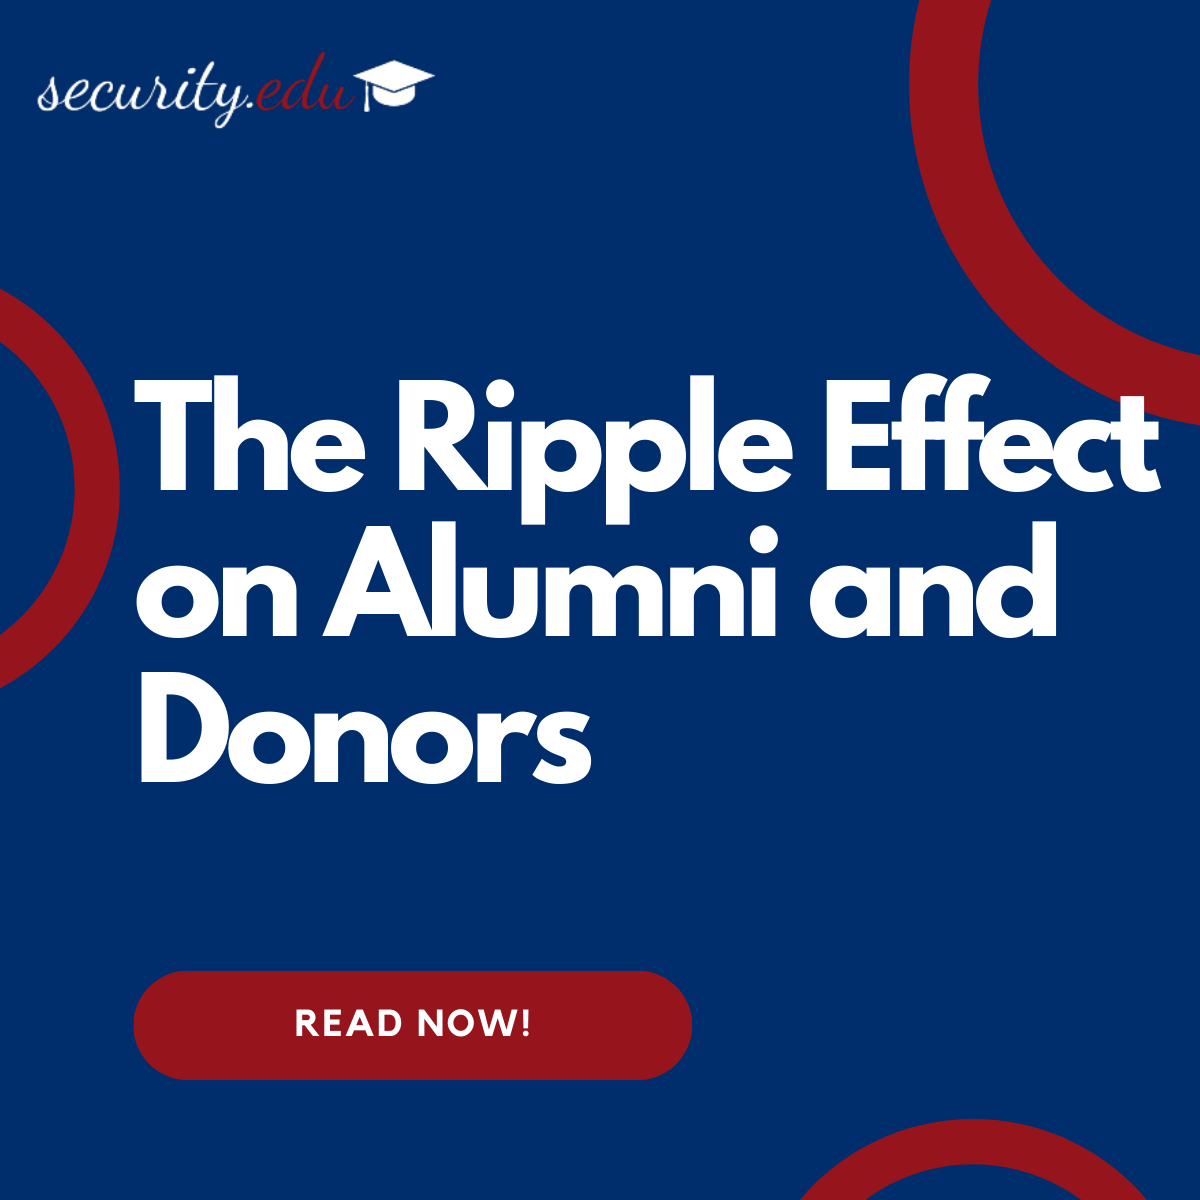 Featured image for “The Ripple Effect on Alumni and Donors”